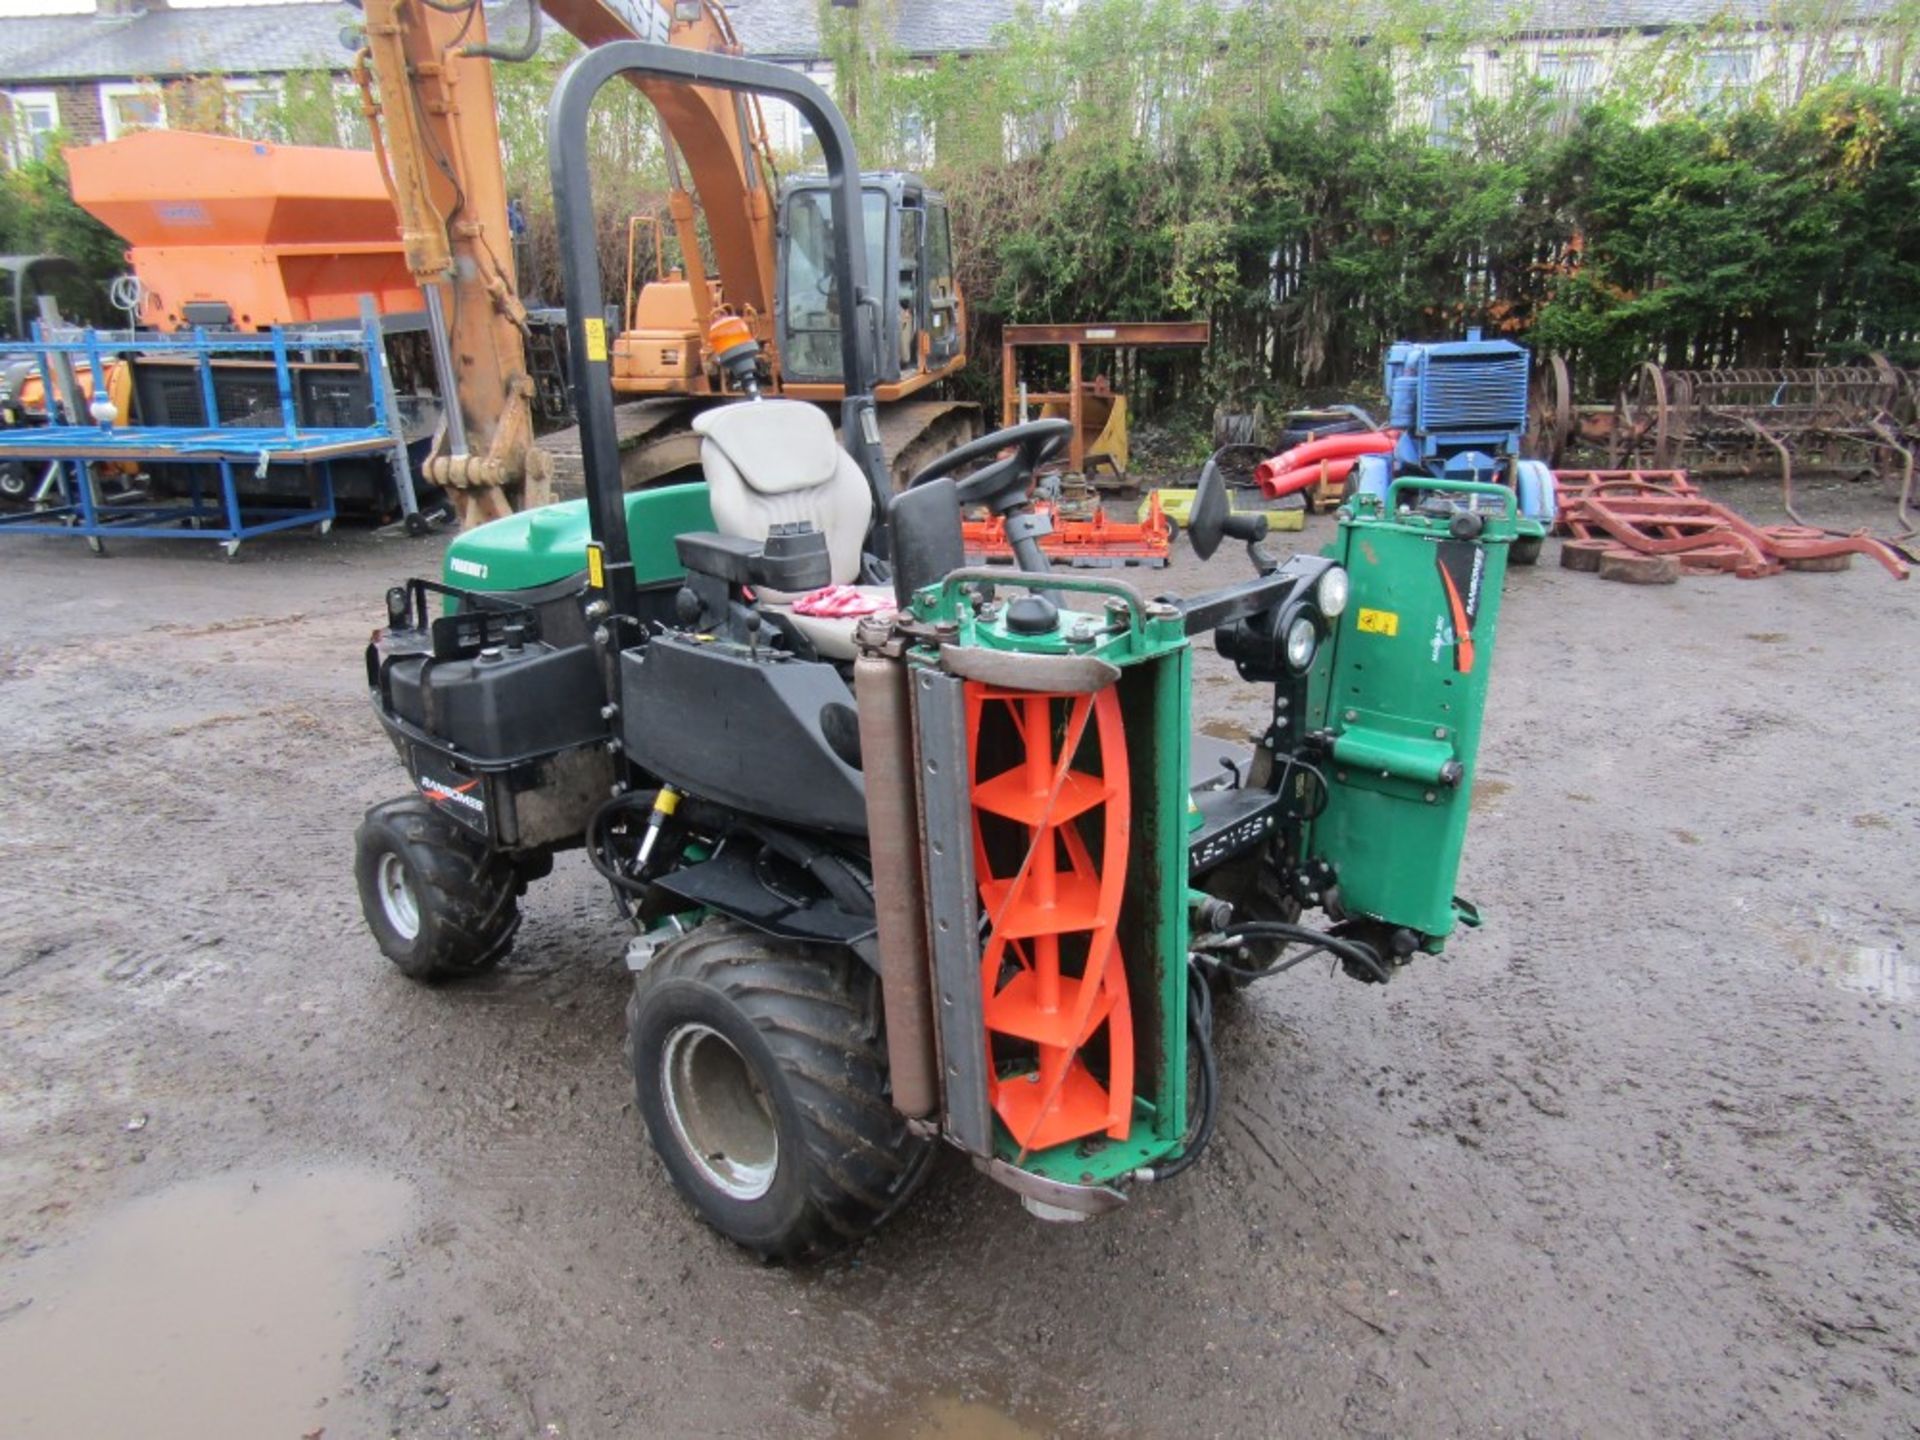 12 reg RANSOMES PARKWAY 3 RIDE ON MOWER (DIRECT COUNCIL) 1ST REG 04/12, V5 HERE, 1 FORMER